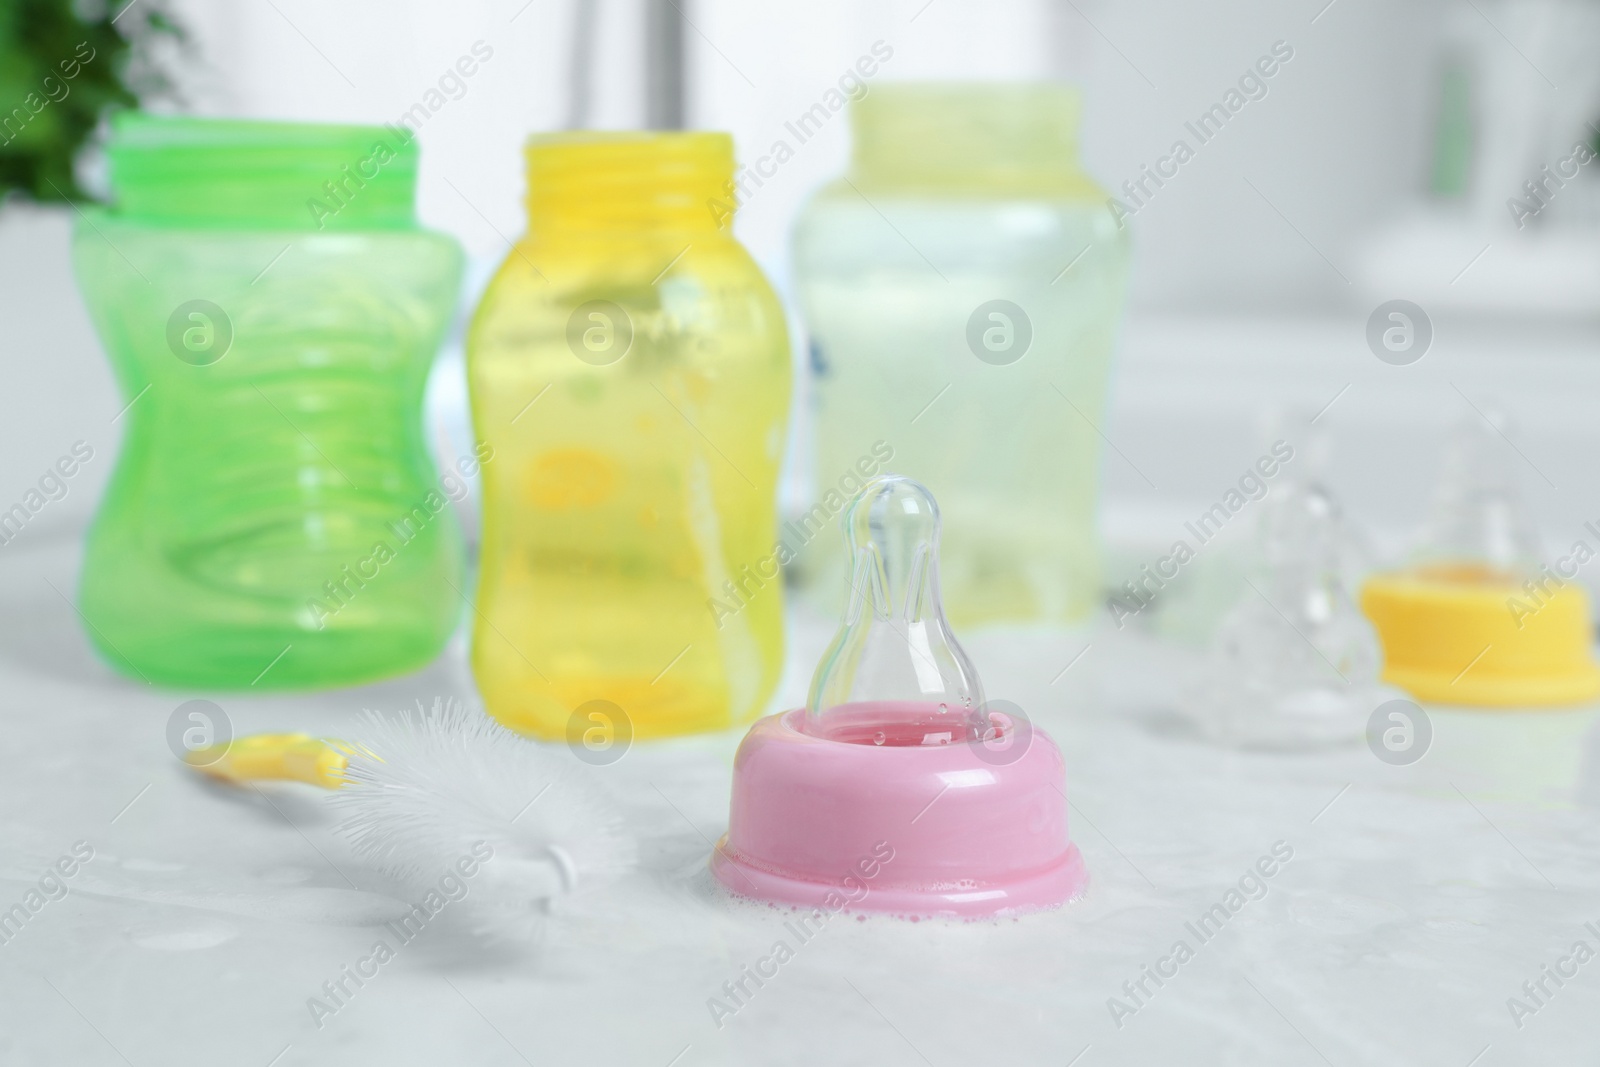 Photo of Baby bottles and nipples after washing on white countertop in kitchen